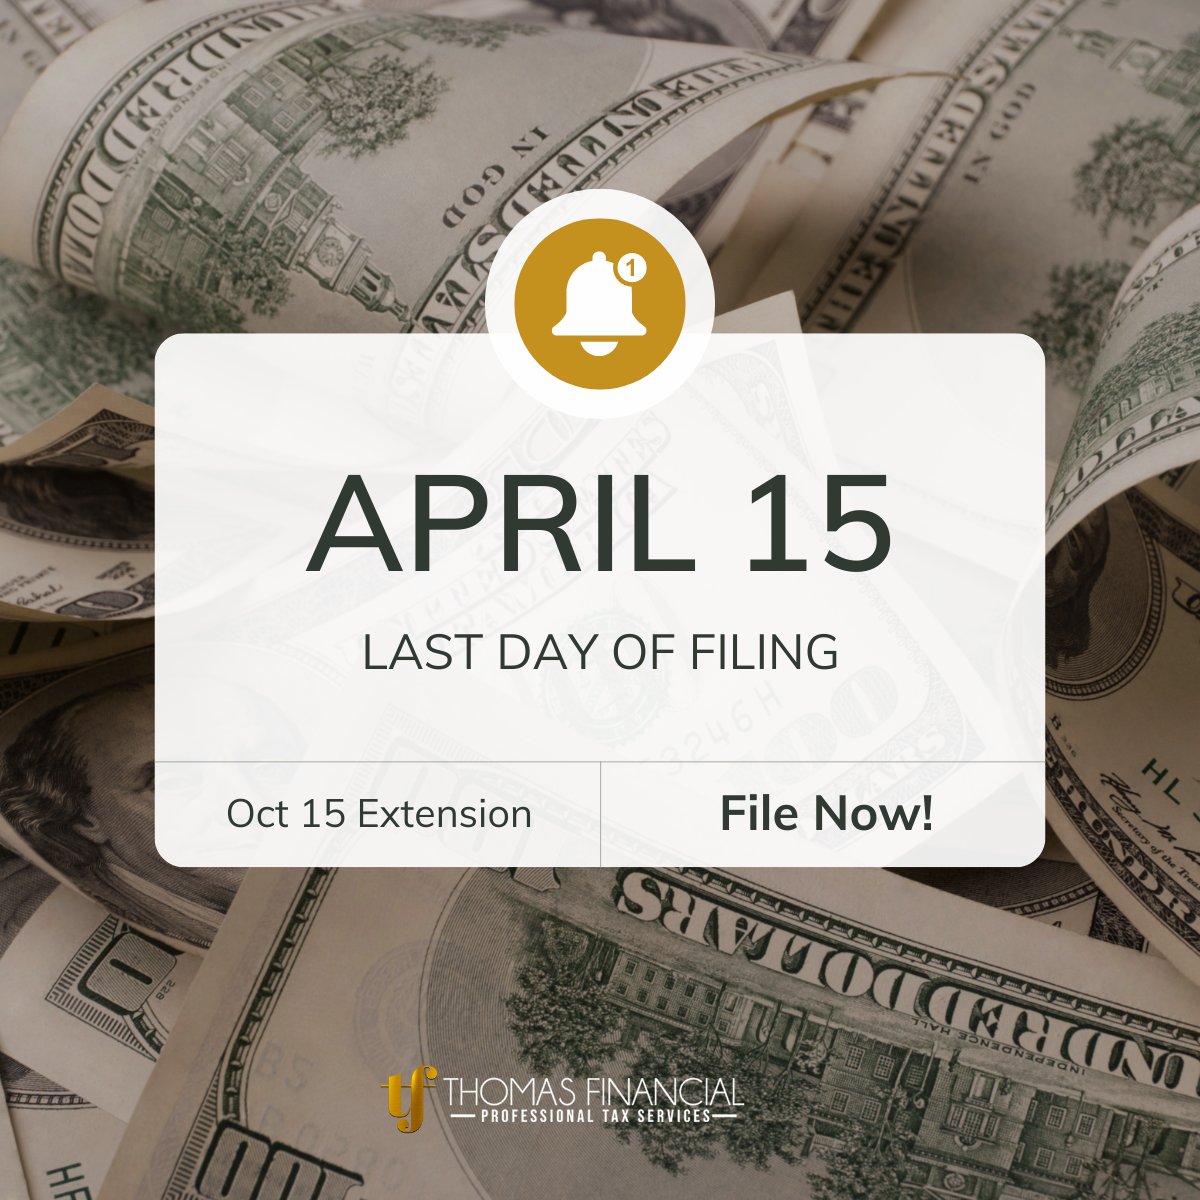 End of Tax Season is today April 15th! We are prepared for any last minute filing. Upload your documents at bit.ly/3U1W2bi

If you are not ready yet, file for an extension for October 15.

#Taxpreparer #Taxbusiness #ThomasFinancial #TaxTok #Taxes #Tax #TaxNews